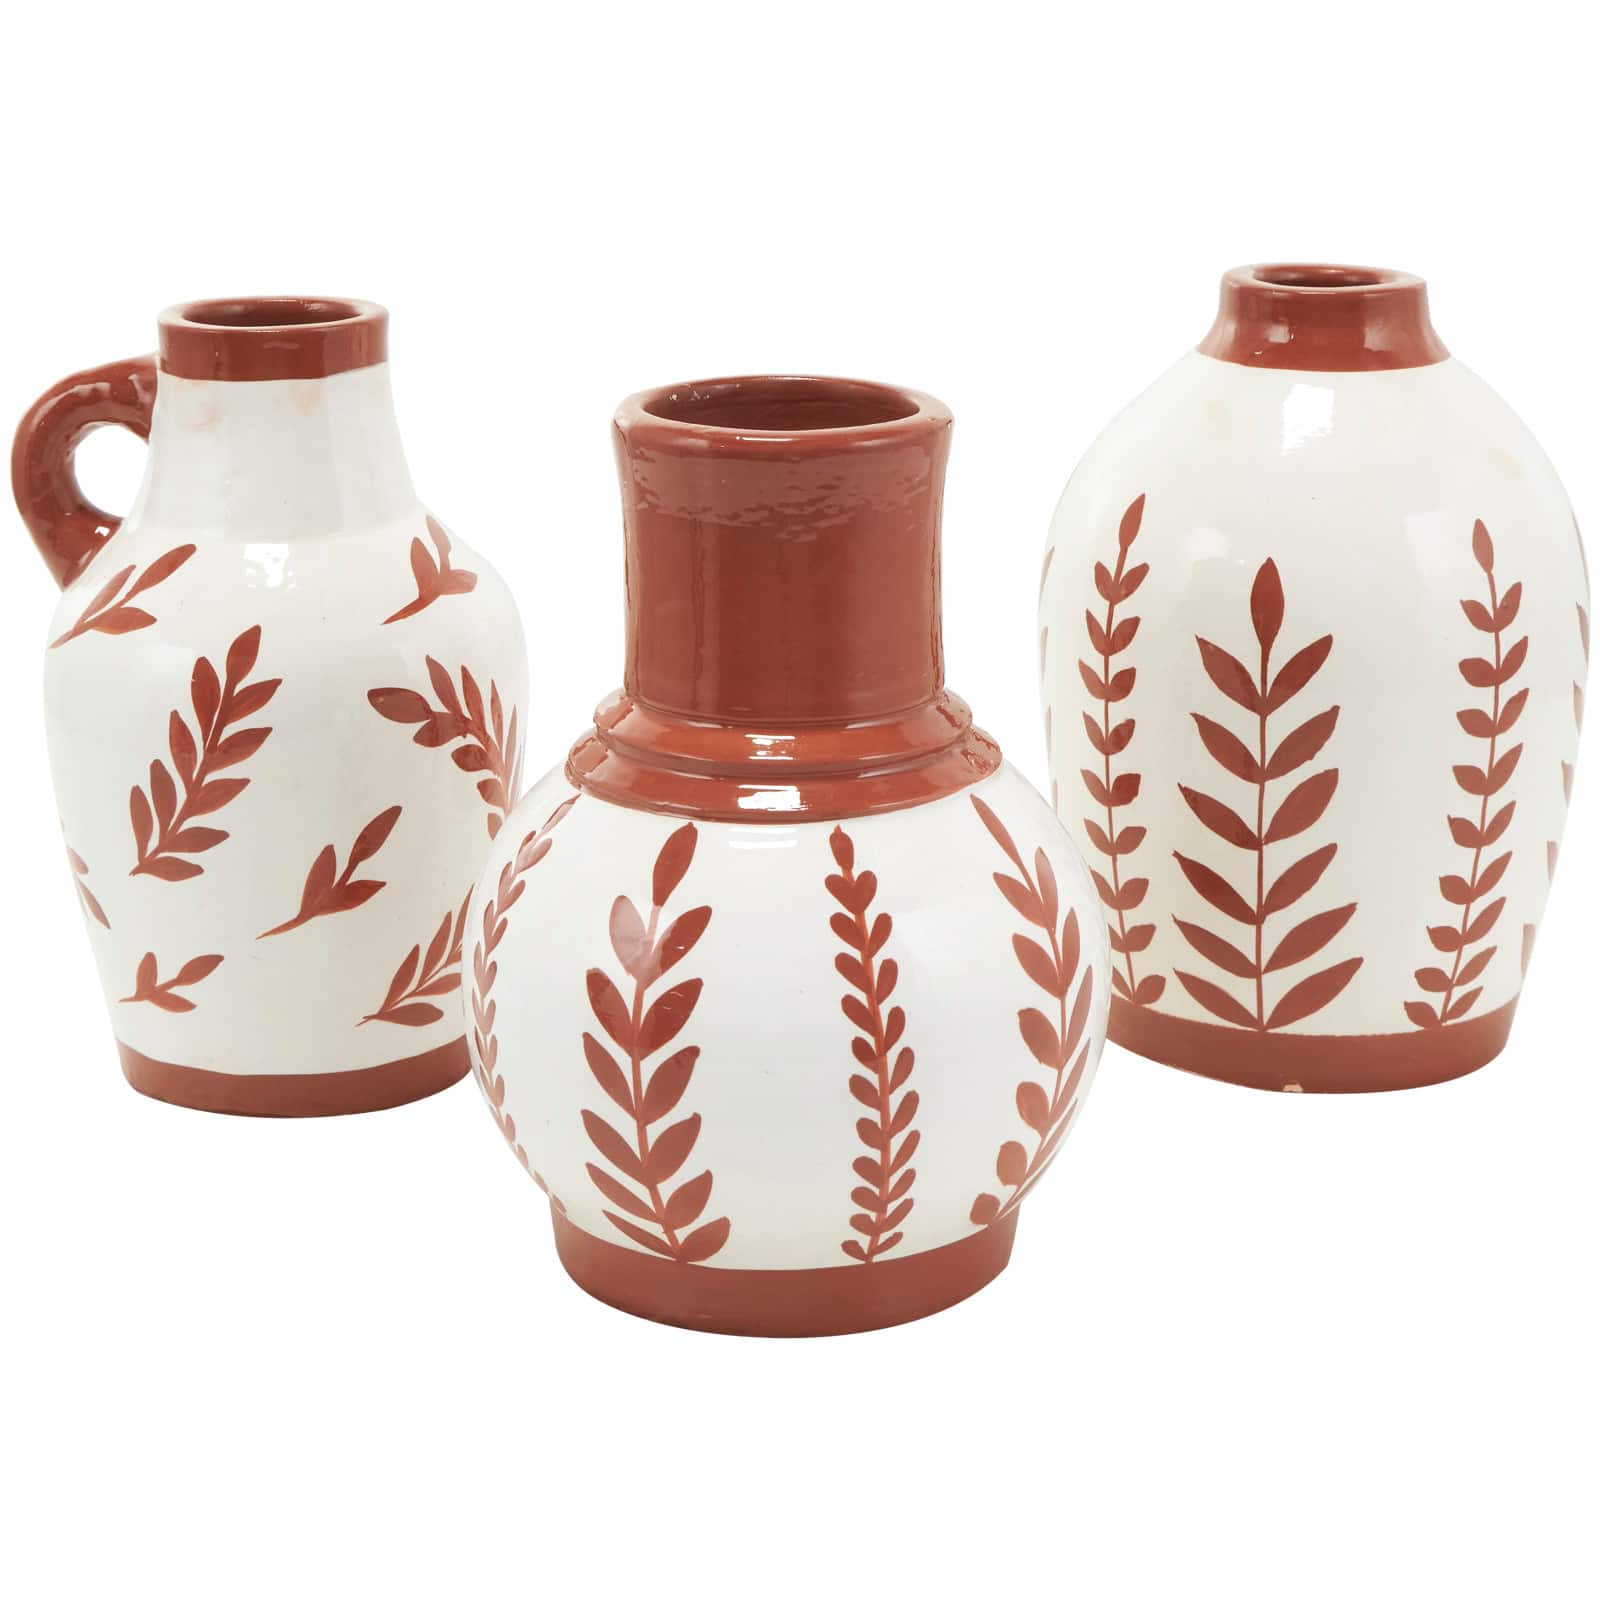 White Ceramic Floral Vase with Terracotta Colored Detailing Set